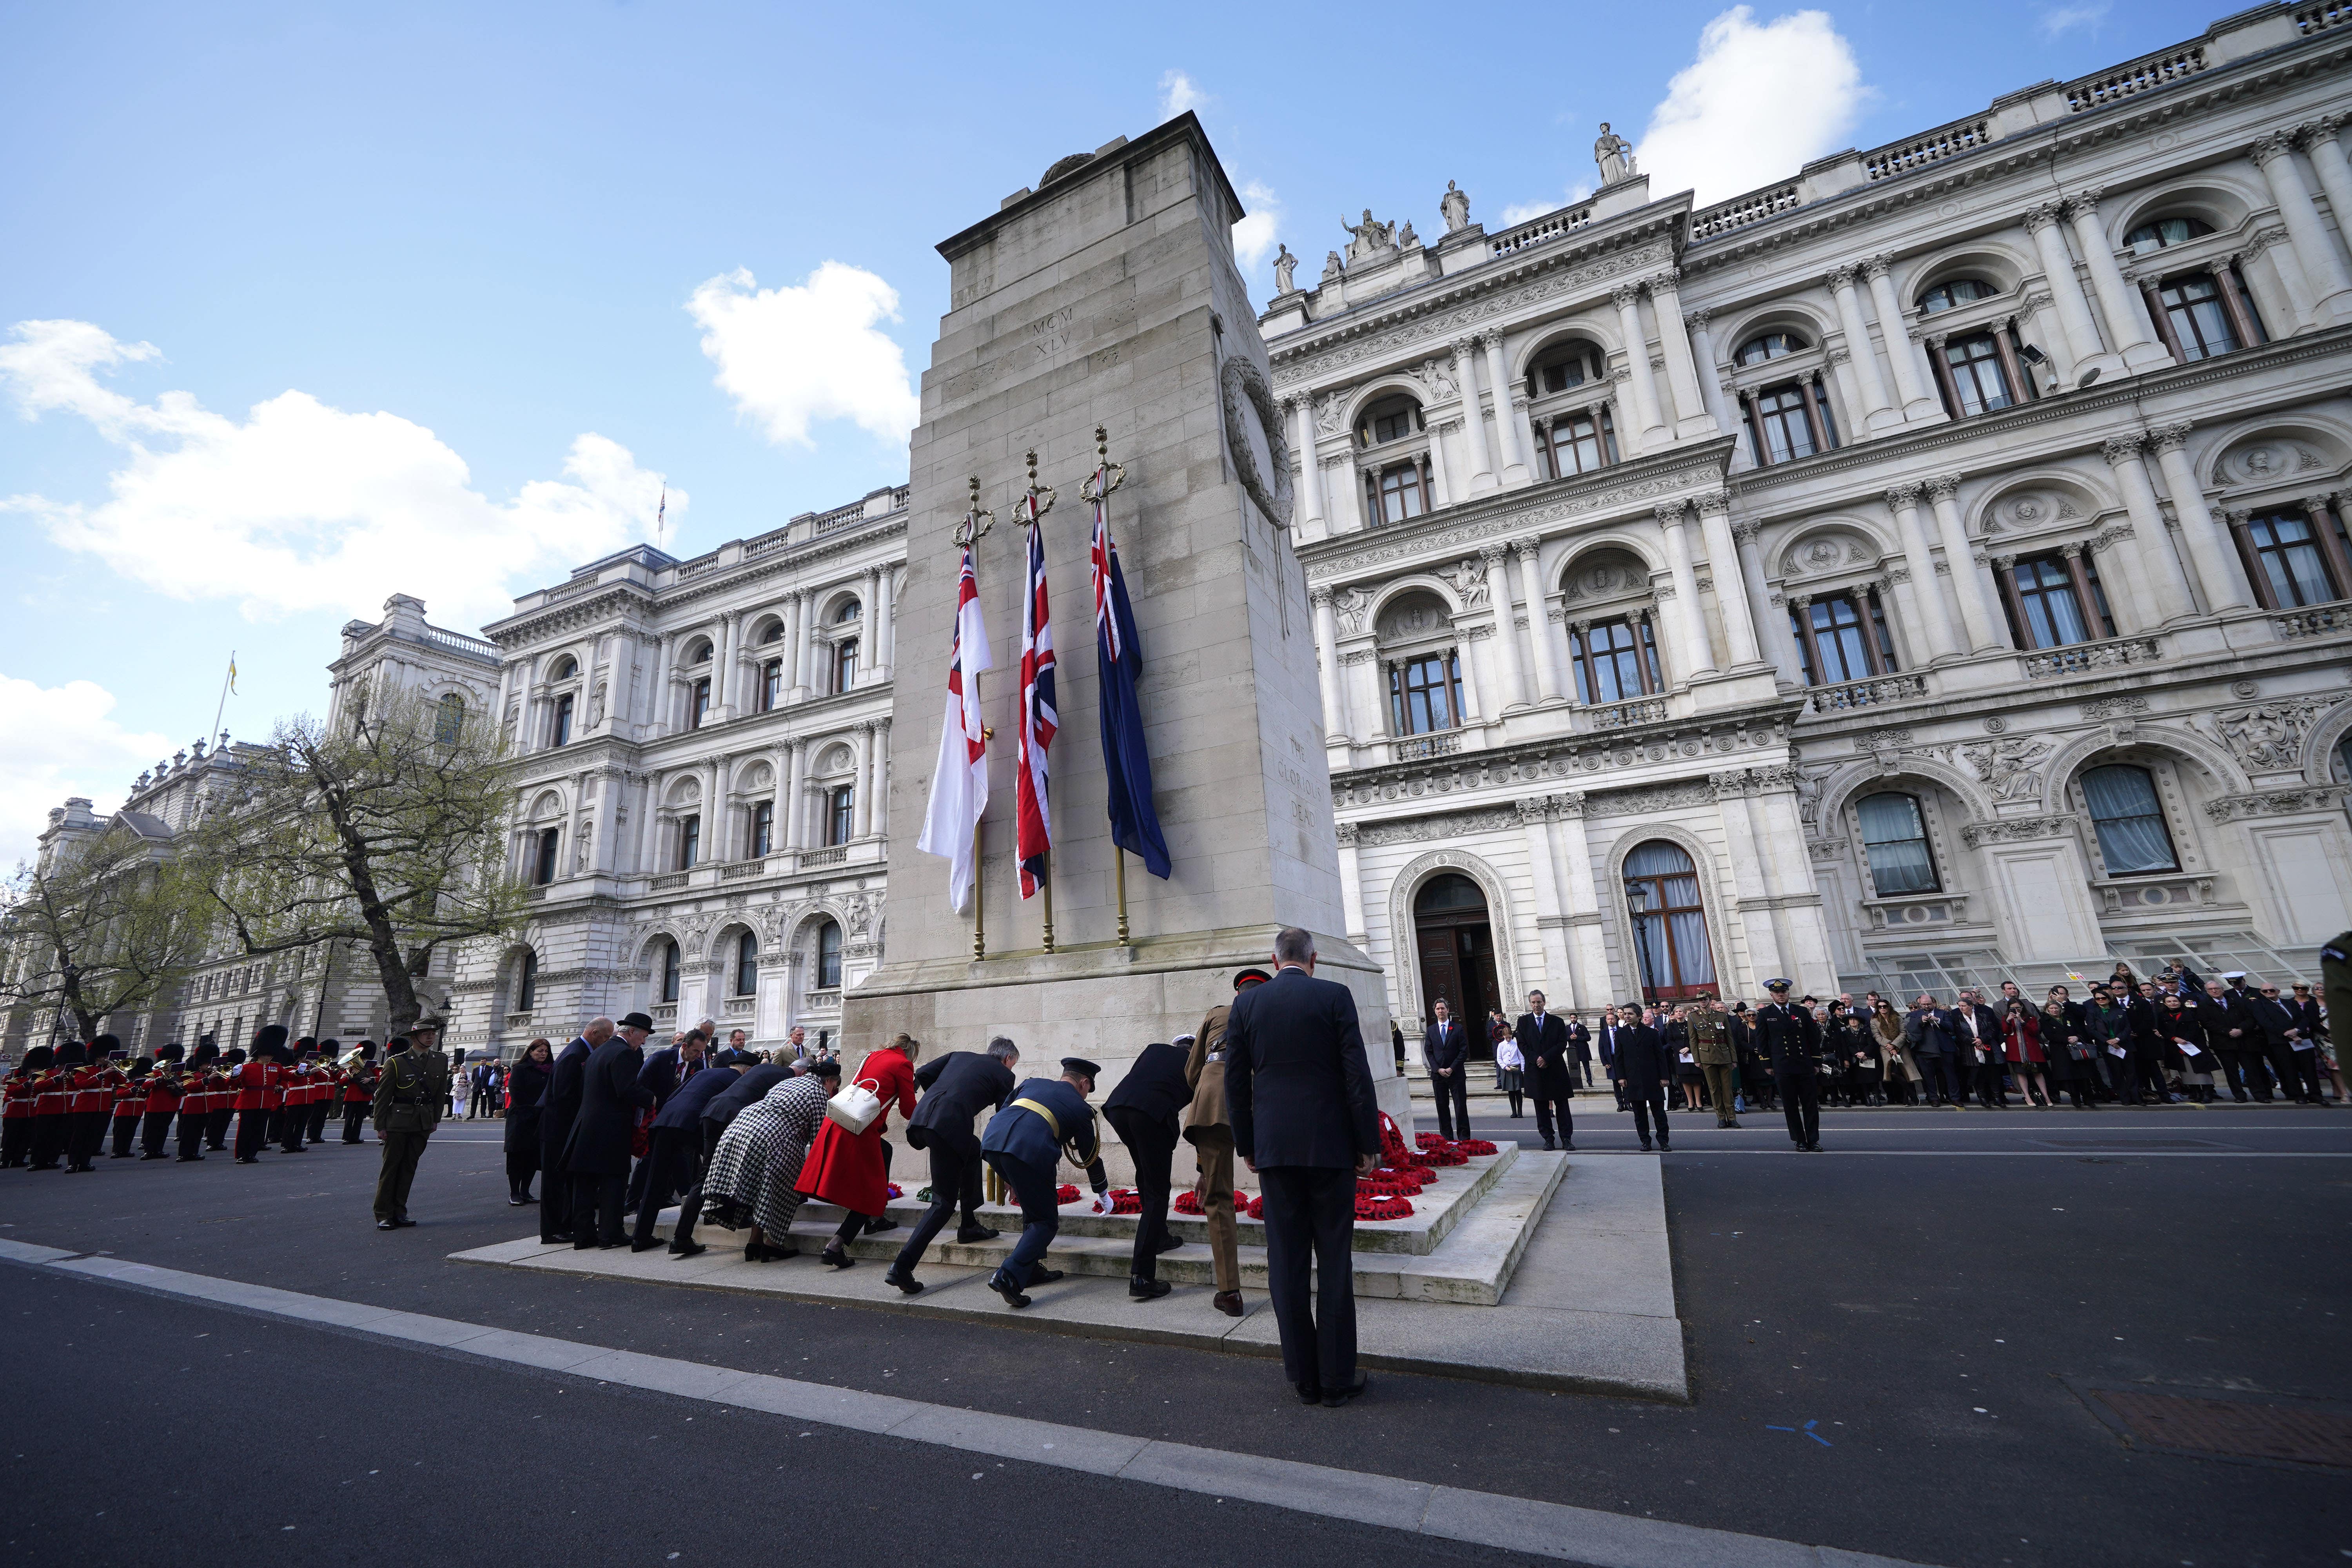 Security minister Tom Tugendhat said the weekly pro-Palestine marches in London present a ‘clear and present risk that the Cenotaph and other war memorials could be desecrated’